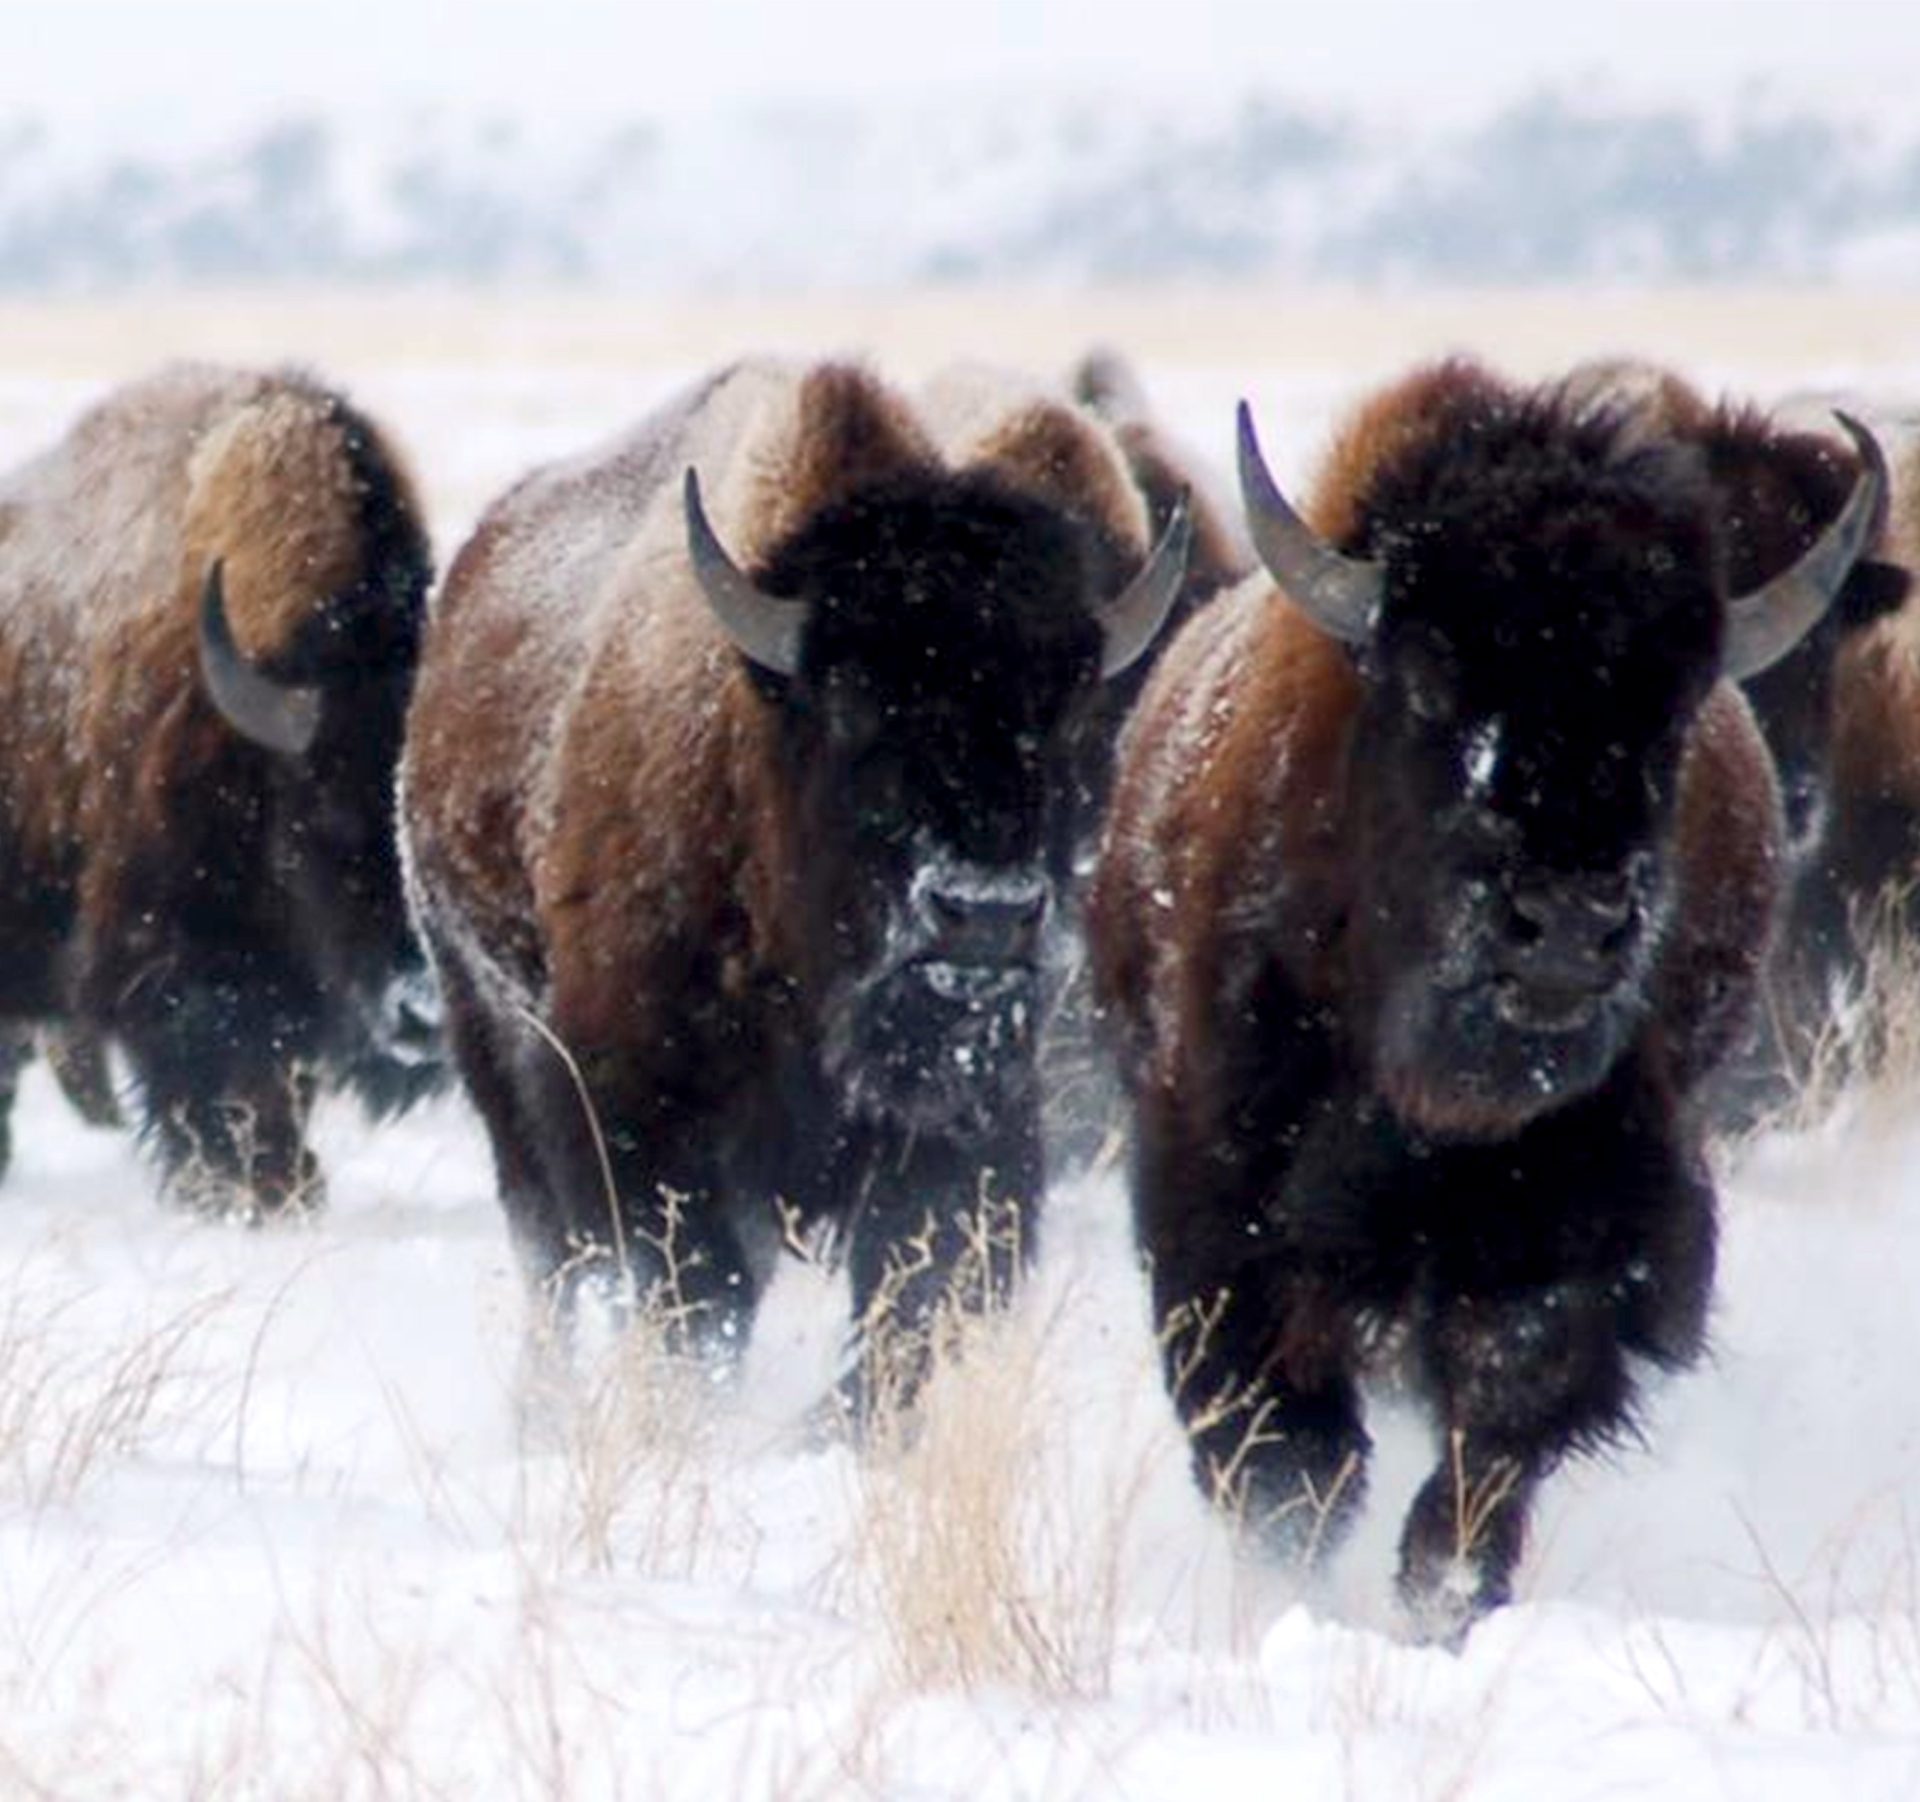 Three adult bison running in the snow.